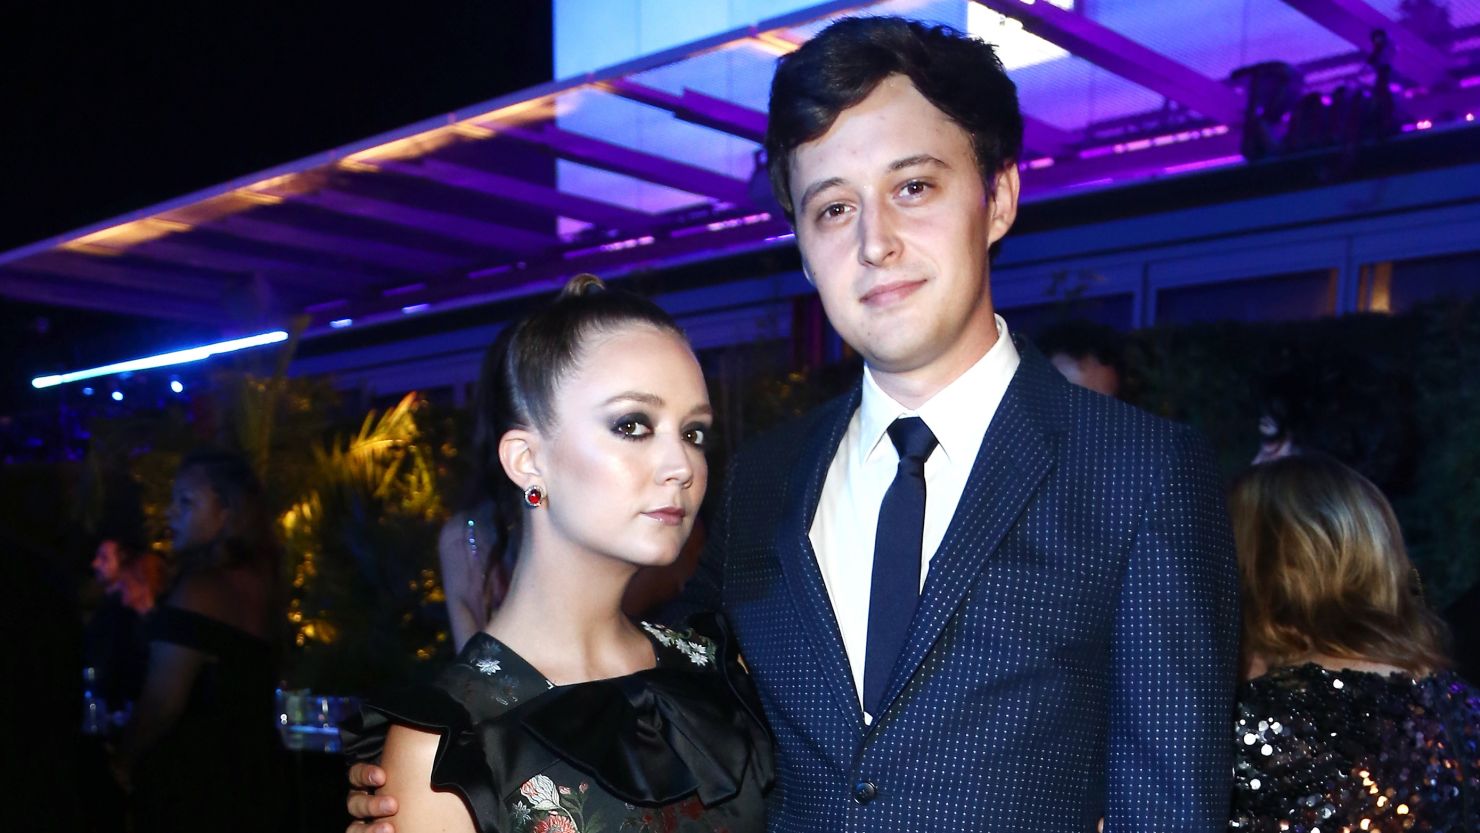 Actors Billie Lourd and Austen Rydell, shown here in 2018, are the parents of a newborn baby boy